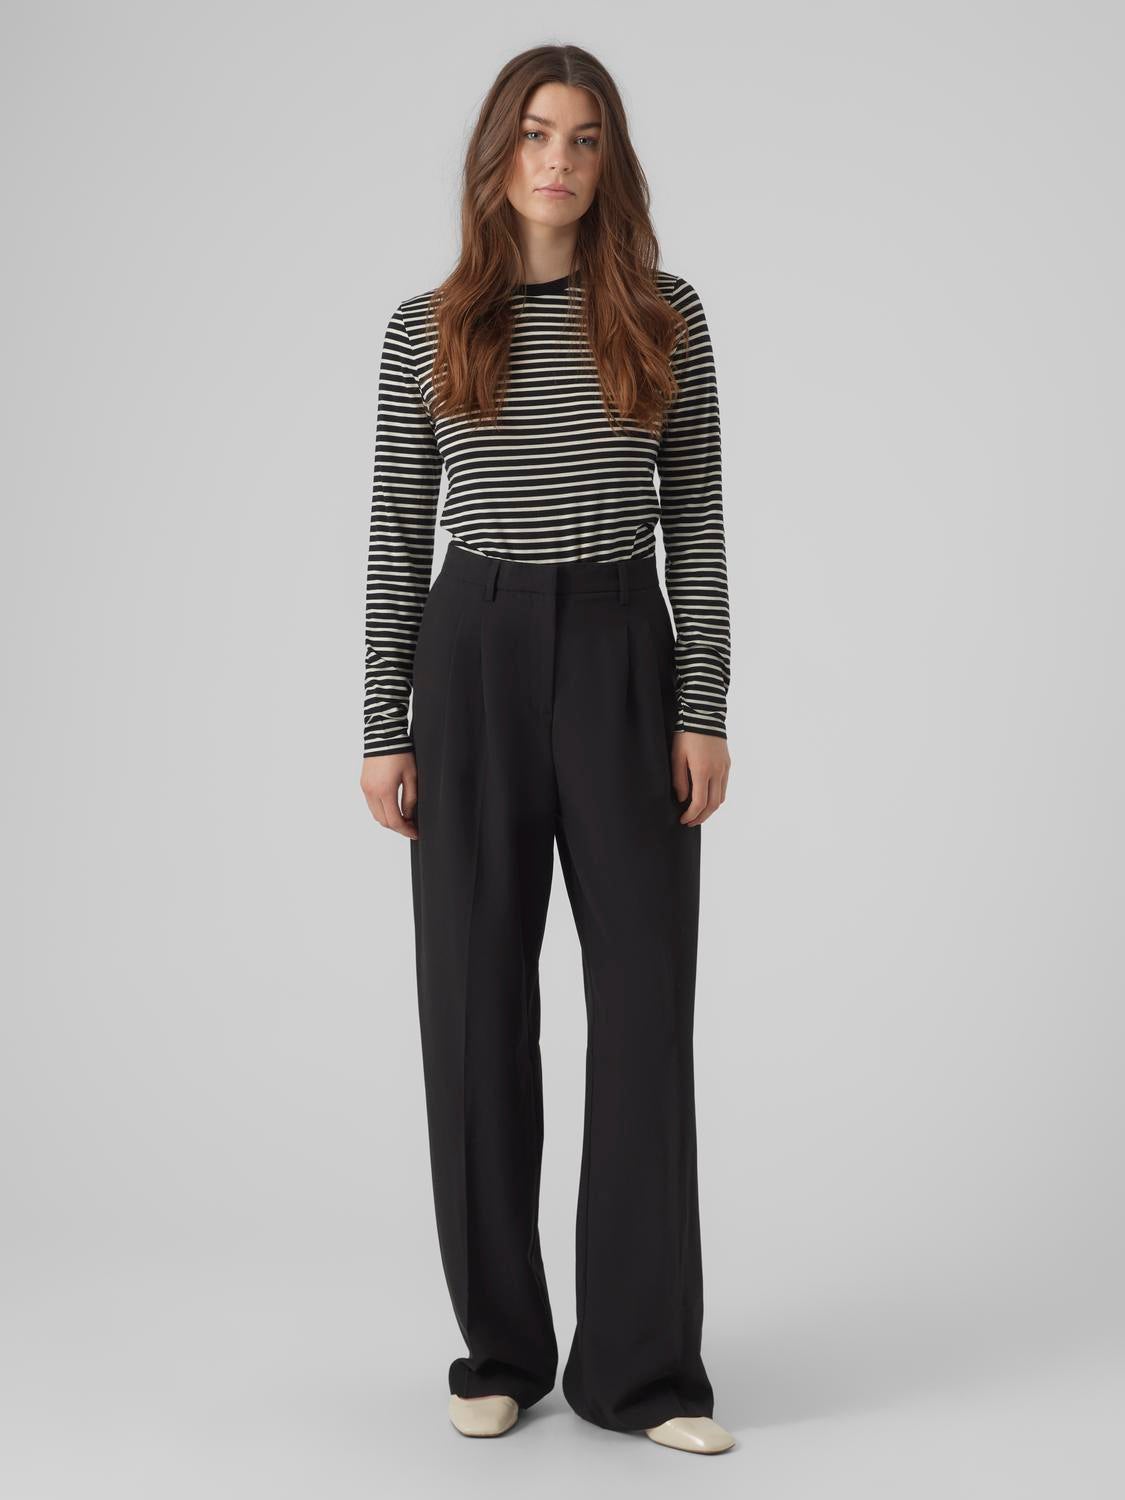 Buy Vero Moda Marquee Collection Women Trouser - Trousers for Women  20215926 | Myntra